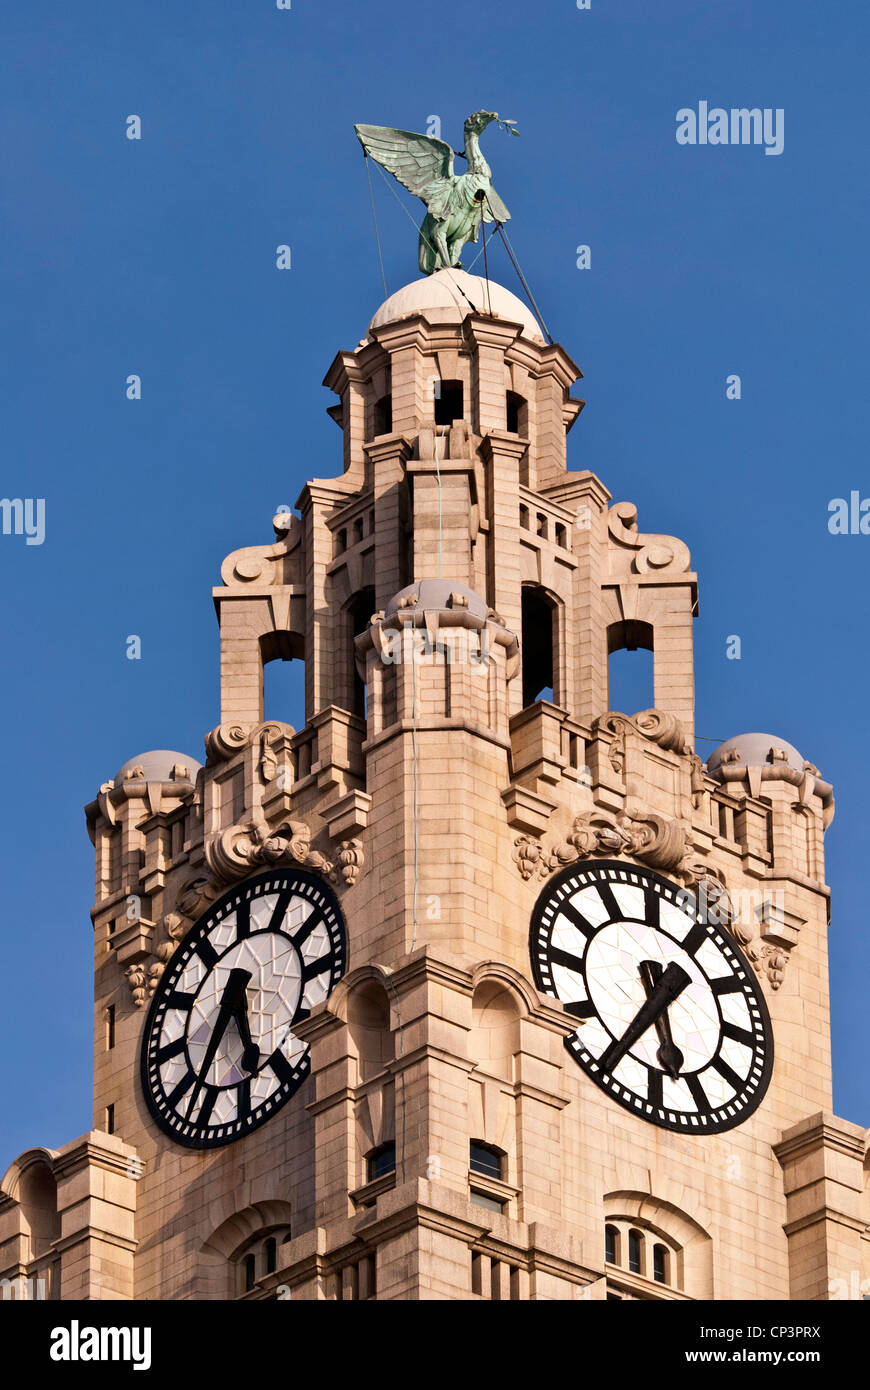 The clock and Liver bird on the Liver Building, Liverpool, England, UK Stock Photo